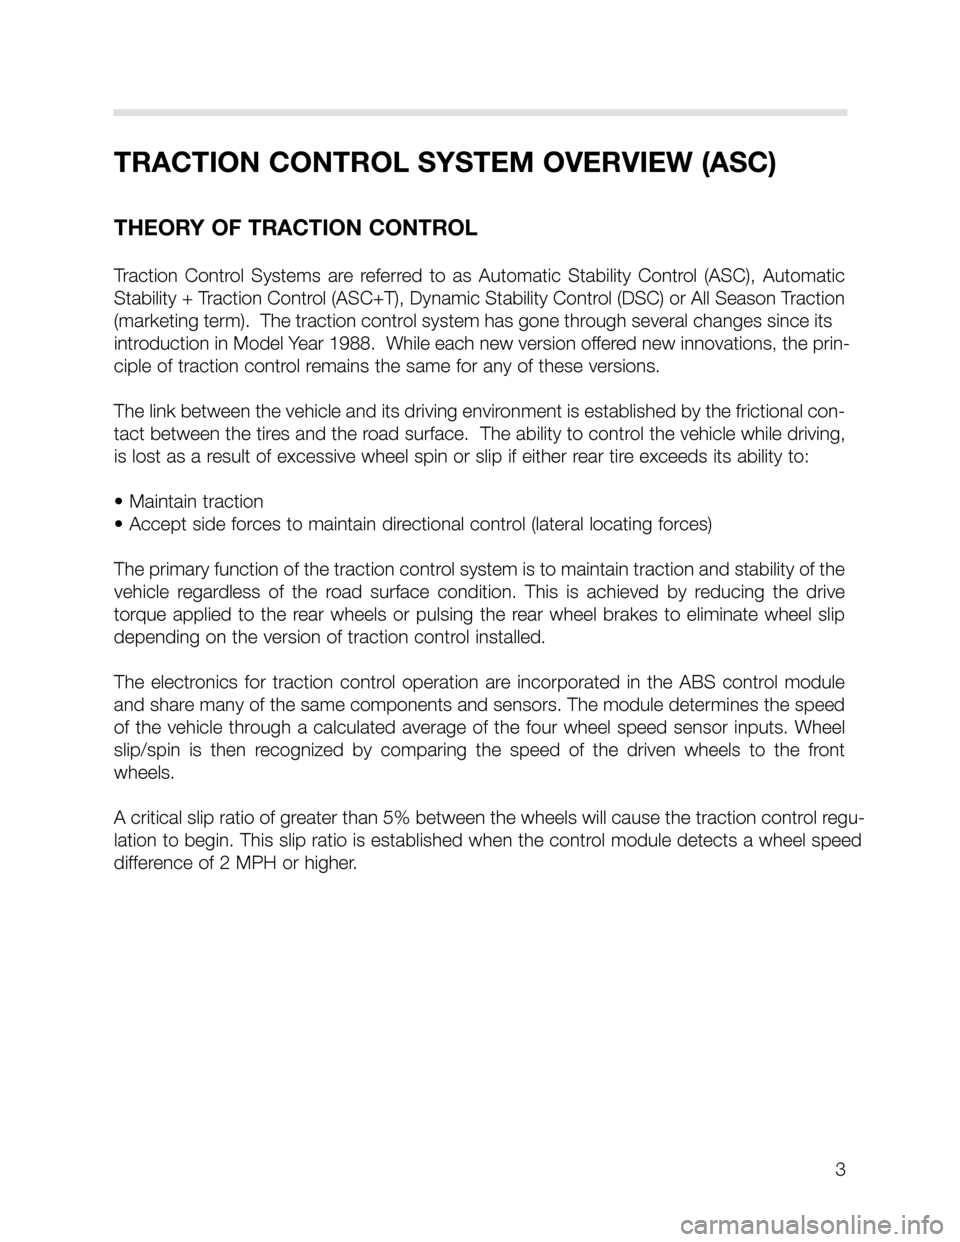 BMW X5 2006 E53 DSC System Workshop Manual 3
TRACTION CONTROL SYSTEM OVERVIEW (ASC)
THEORY OF TRACTION CONTROL
Traction  Control  Systems  are  referred  to  as  Automatic  Stability  Control  (ASC),  Automatic
Stability + Traction Control (AS